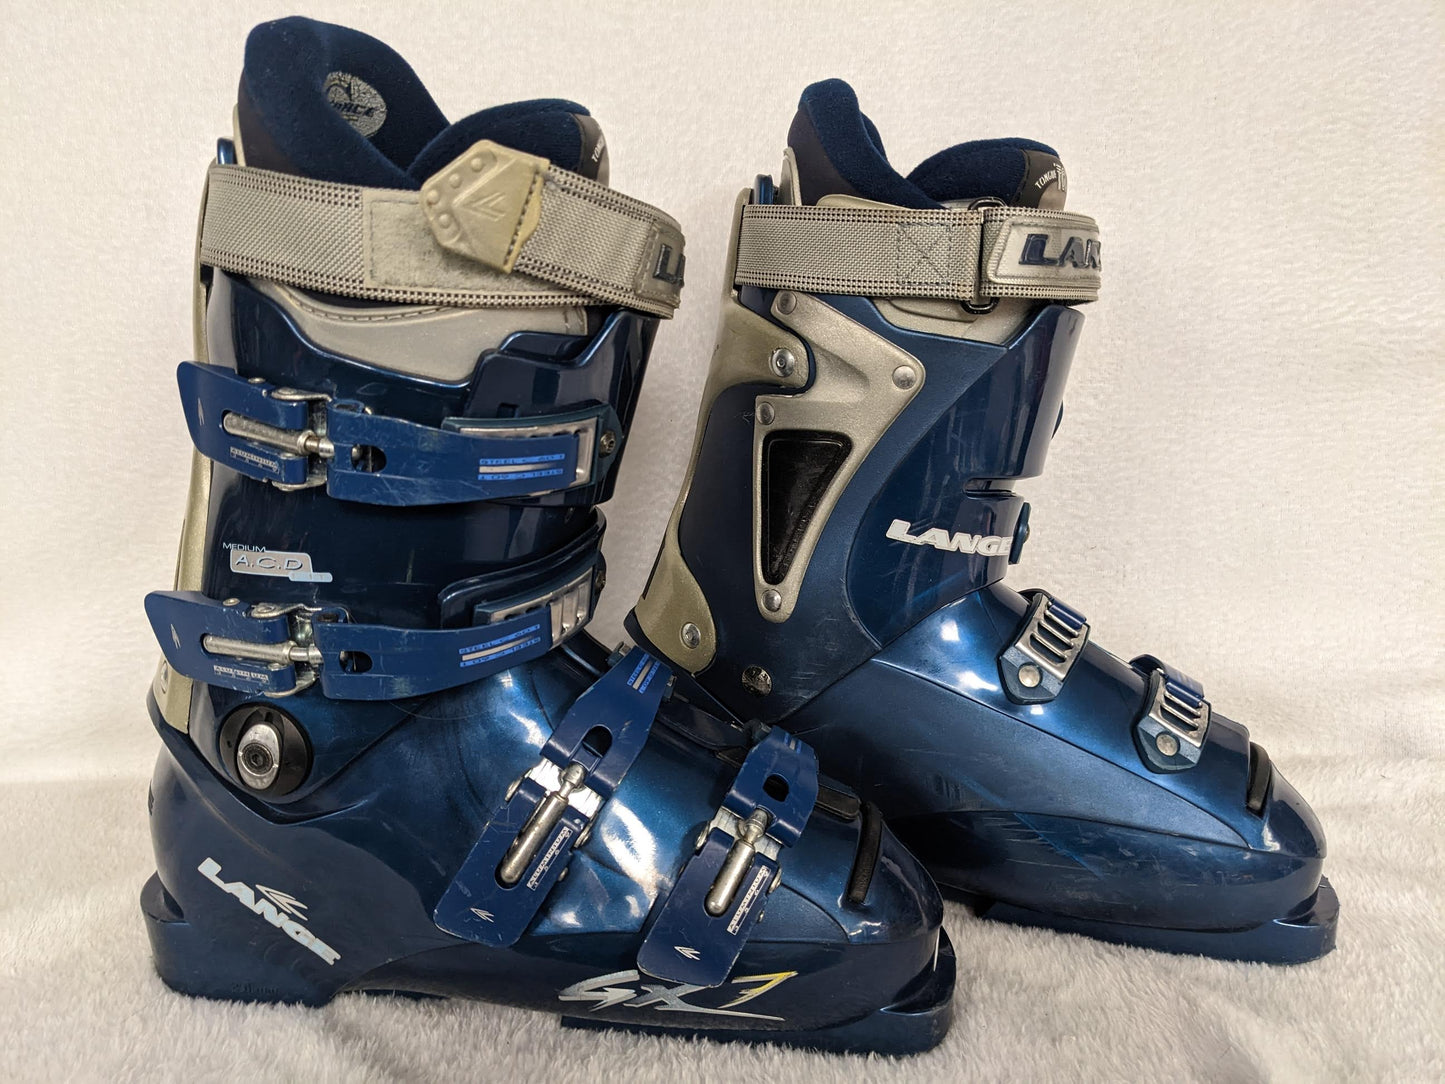 Lange GX7 Ski Boots Size 24.5 Color Blue Condition Used